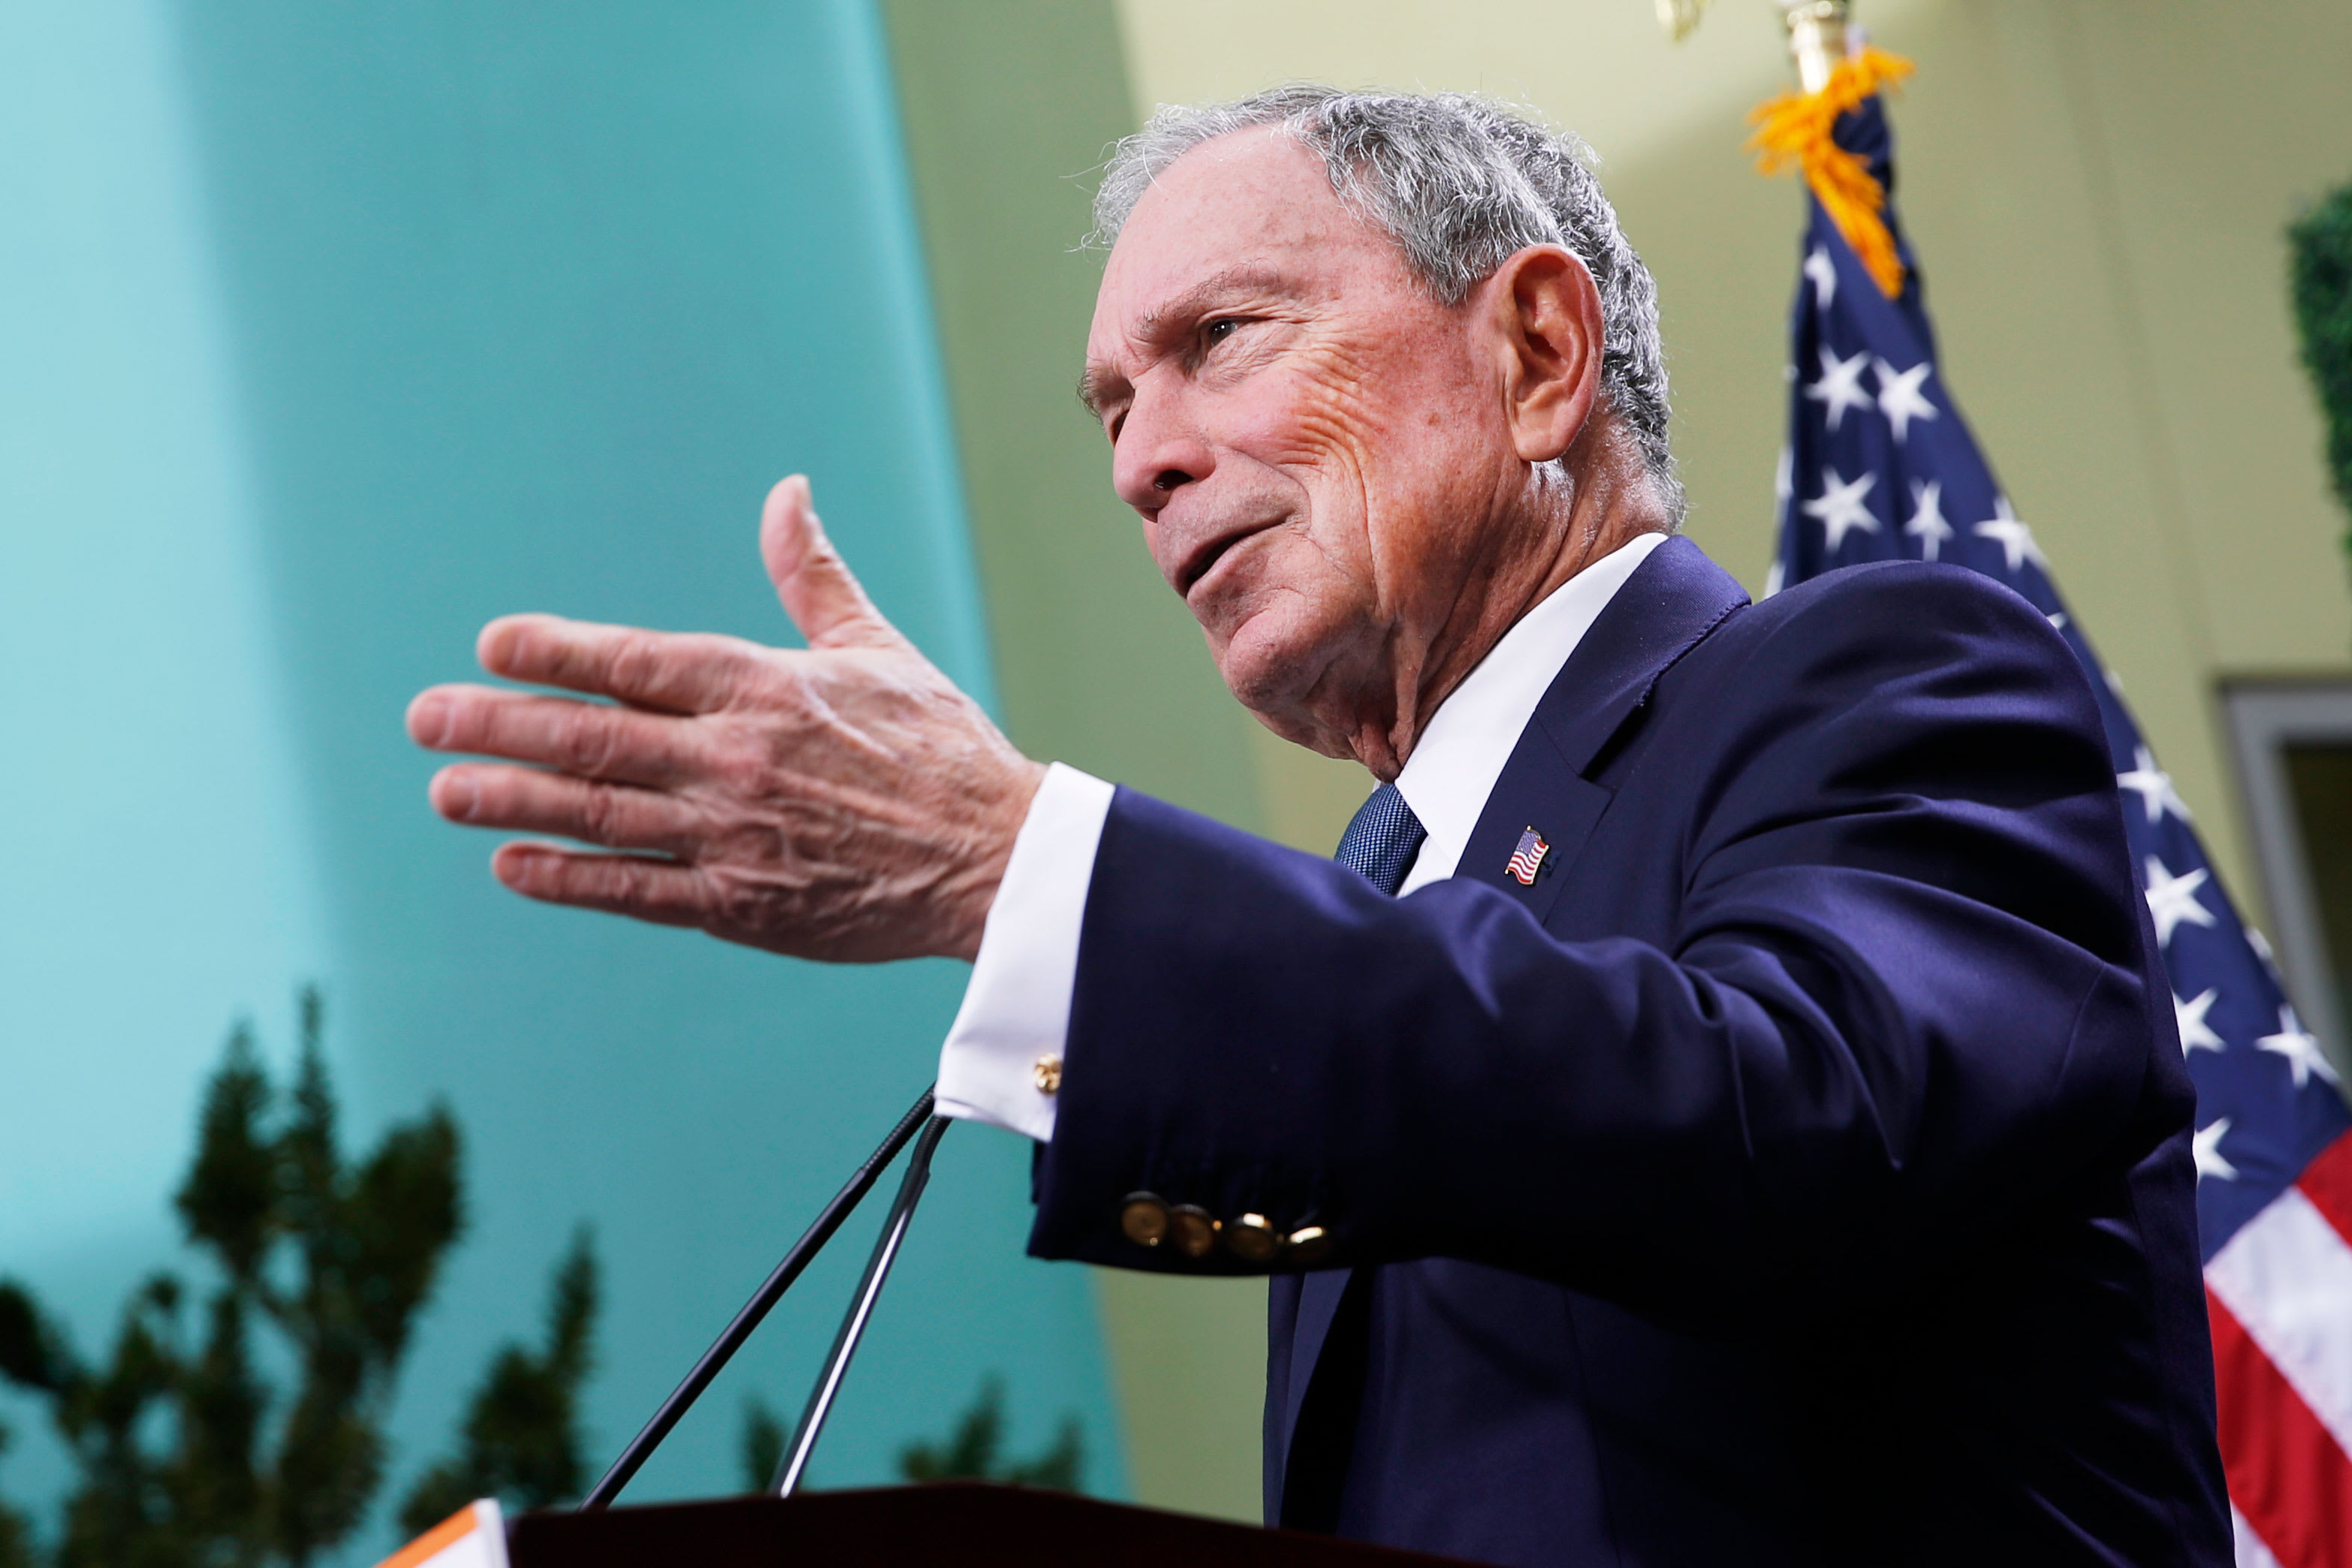 ‘Mike Bloomberg has extra money than God’